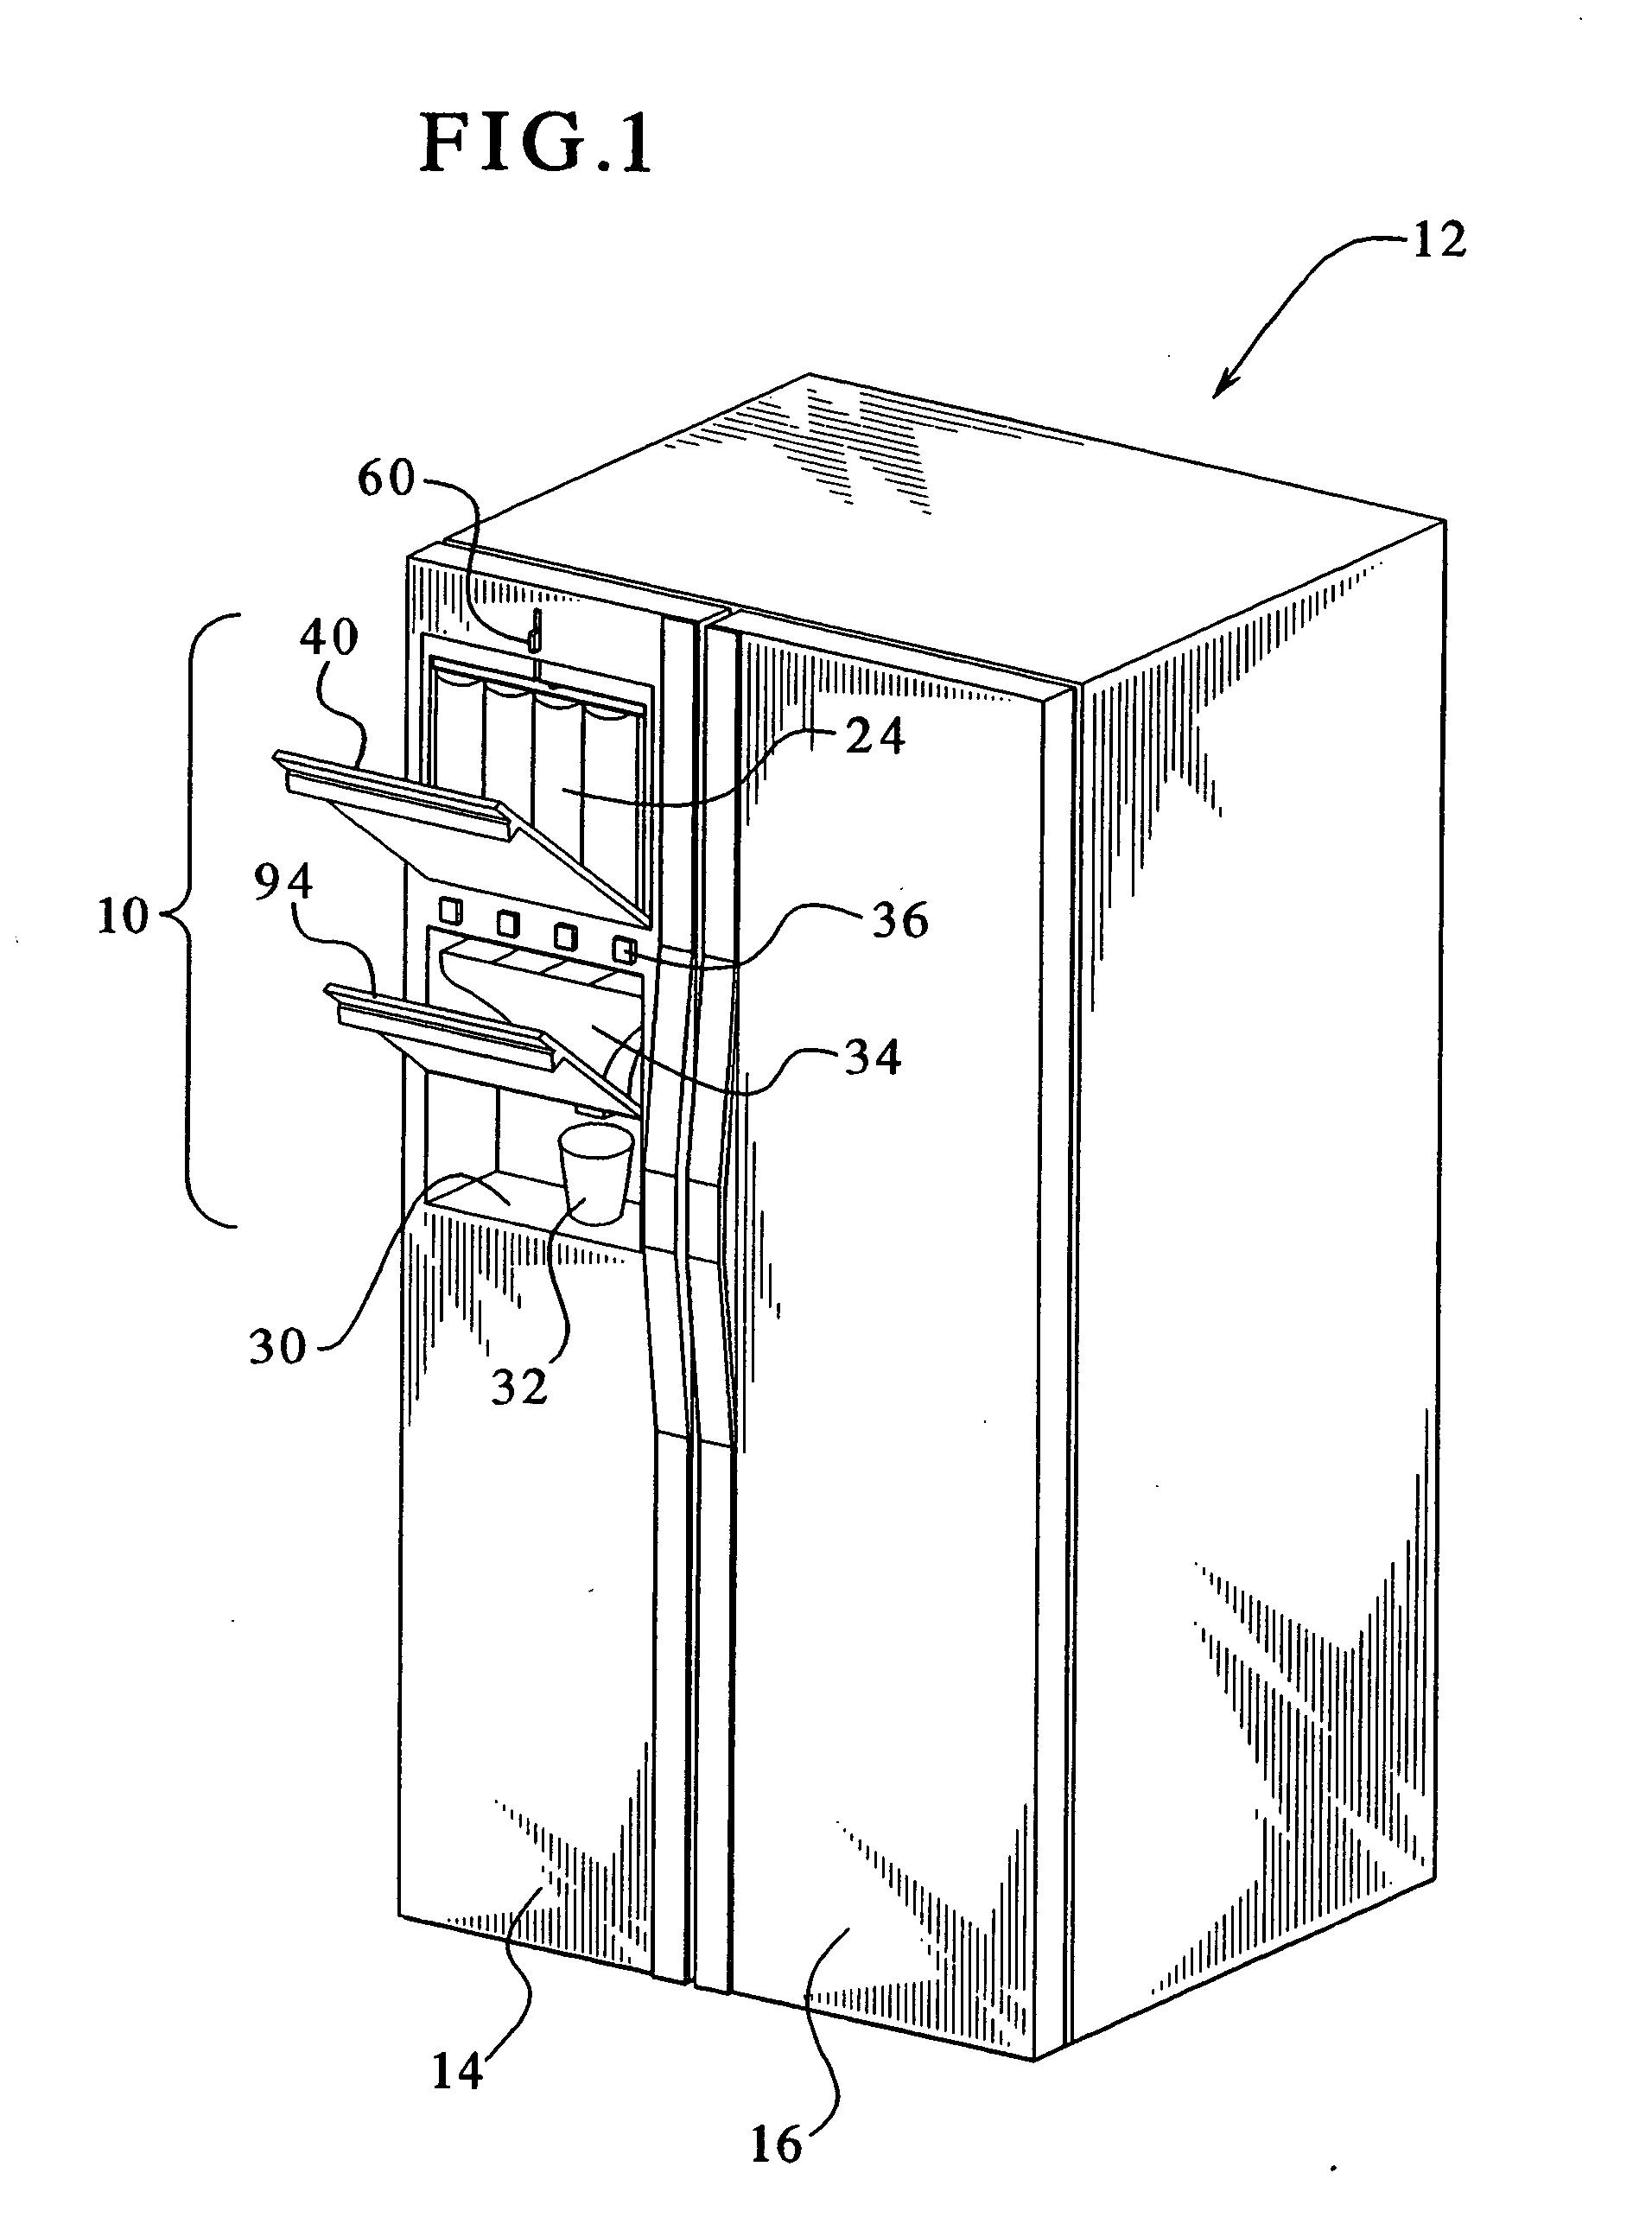 Refrigerator having a beverage dispensing apparatus with a drink supply canister holder